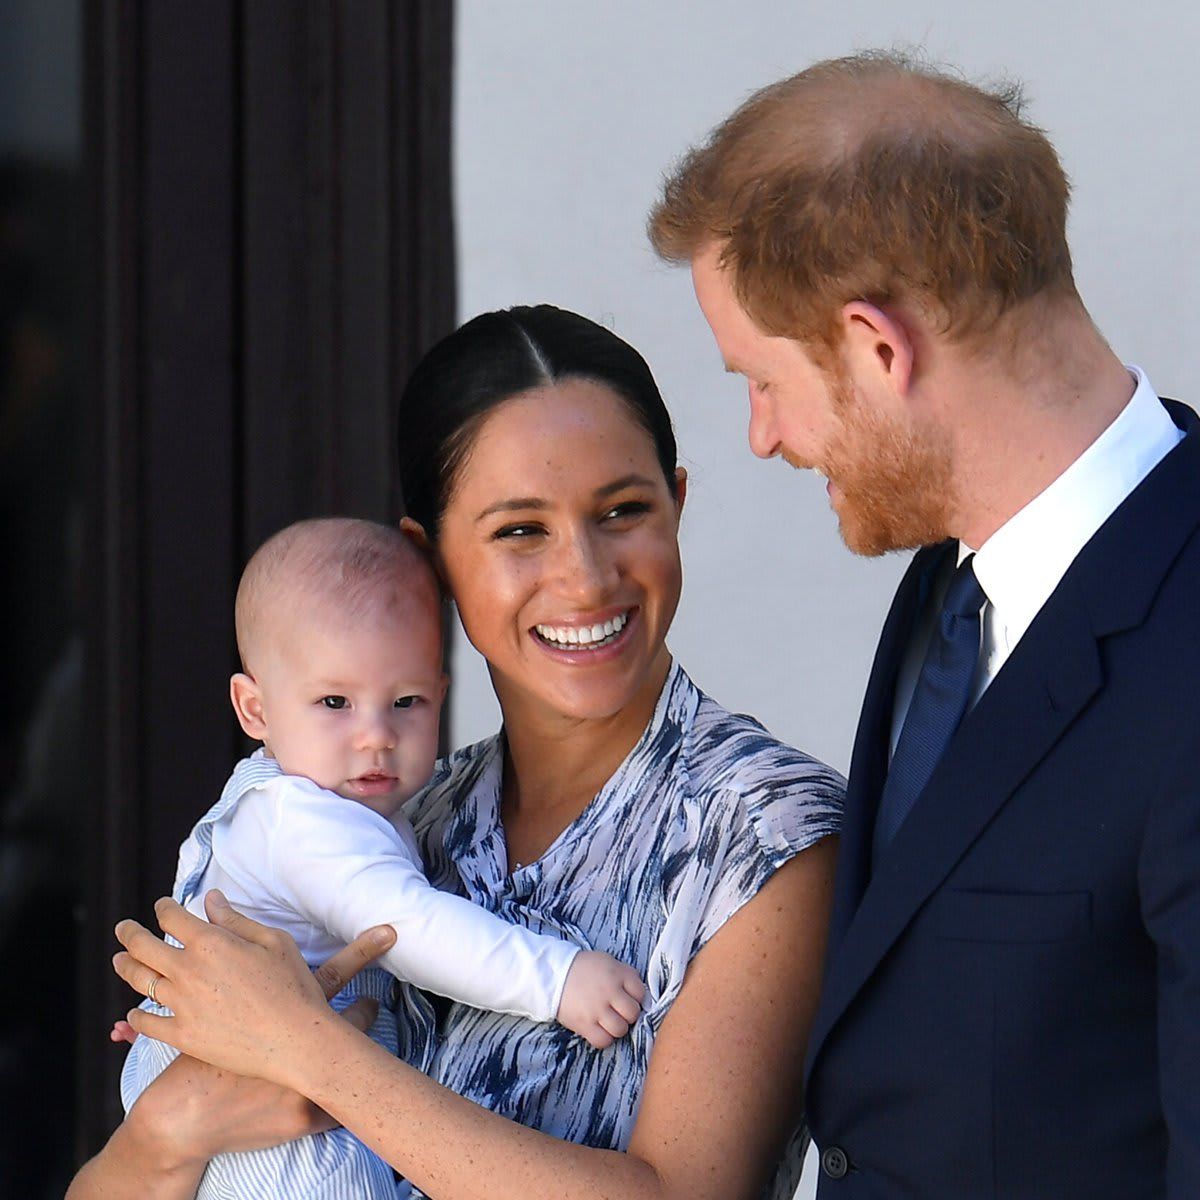 The Duke and Duchess of Sussex Visit South Africa with baby Archie